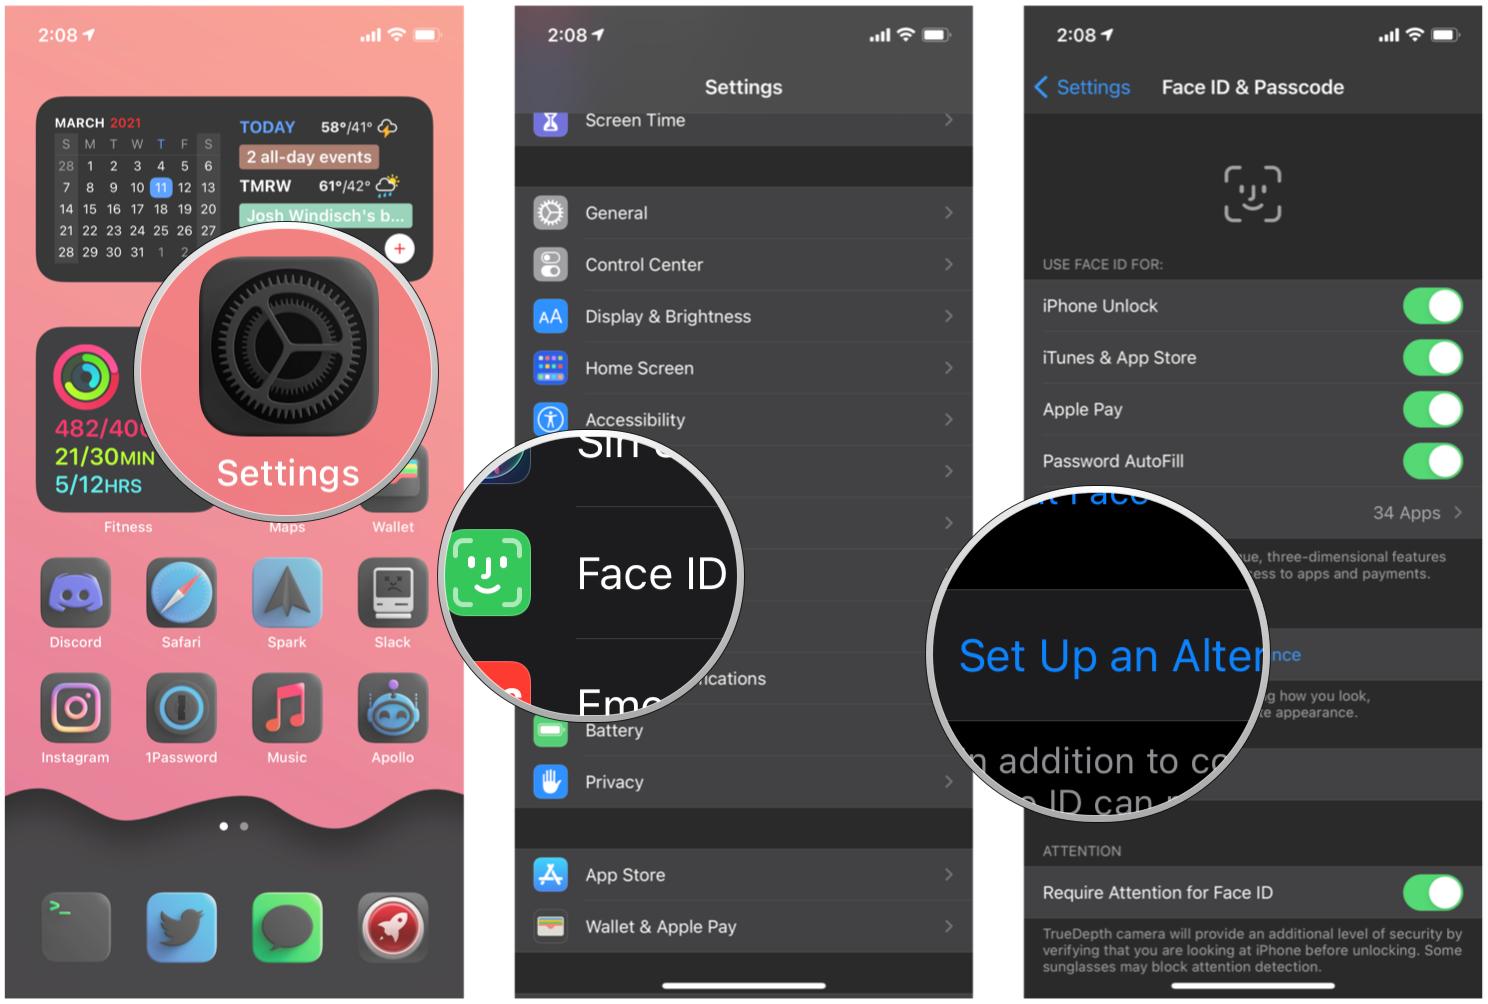 How to set up an alternative apperance or second person to Face ID on iPhone by showing: Launch Settings, tap Face ID & Passcode, input passcode, tap Set Up Alternate Appearance